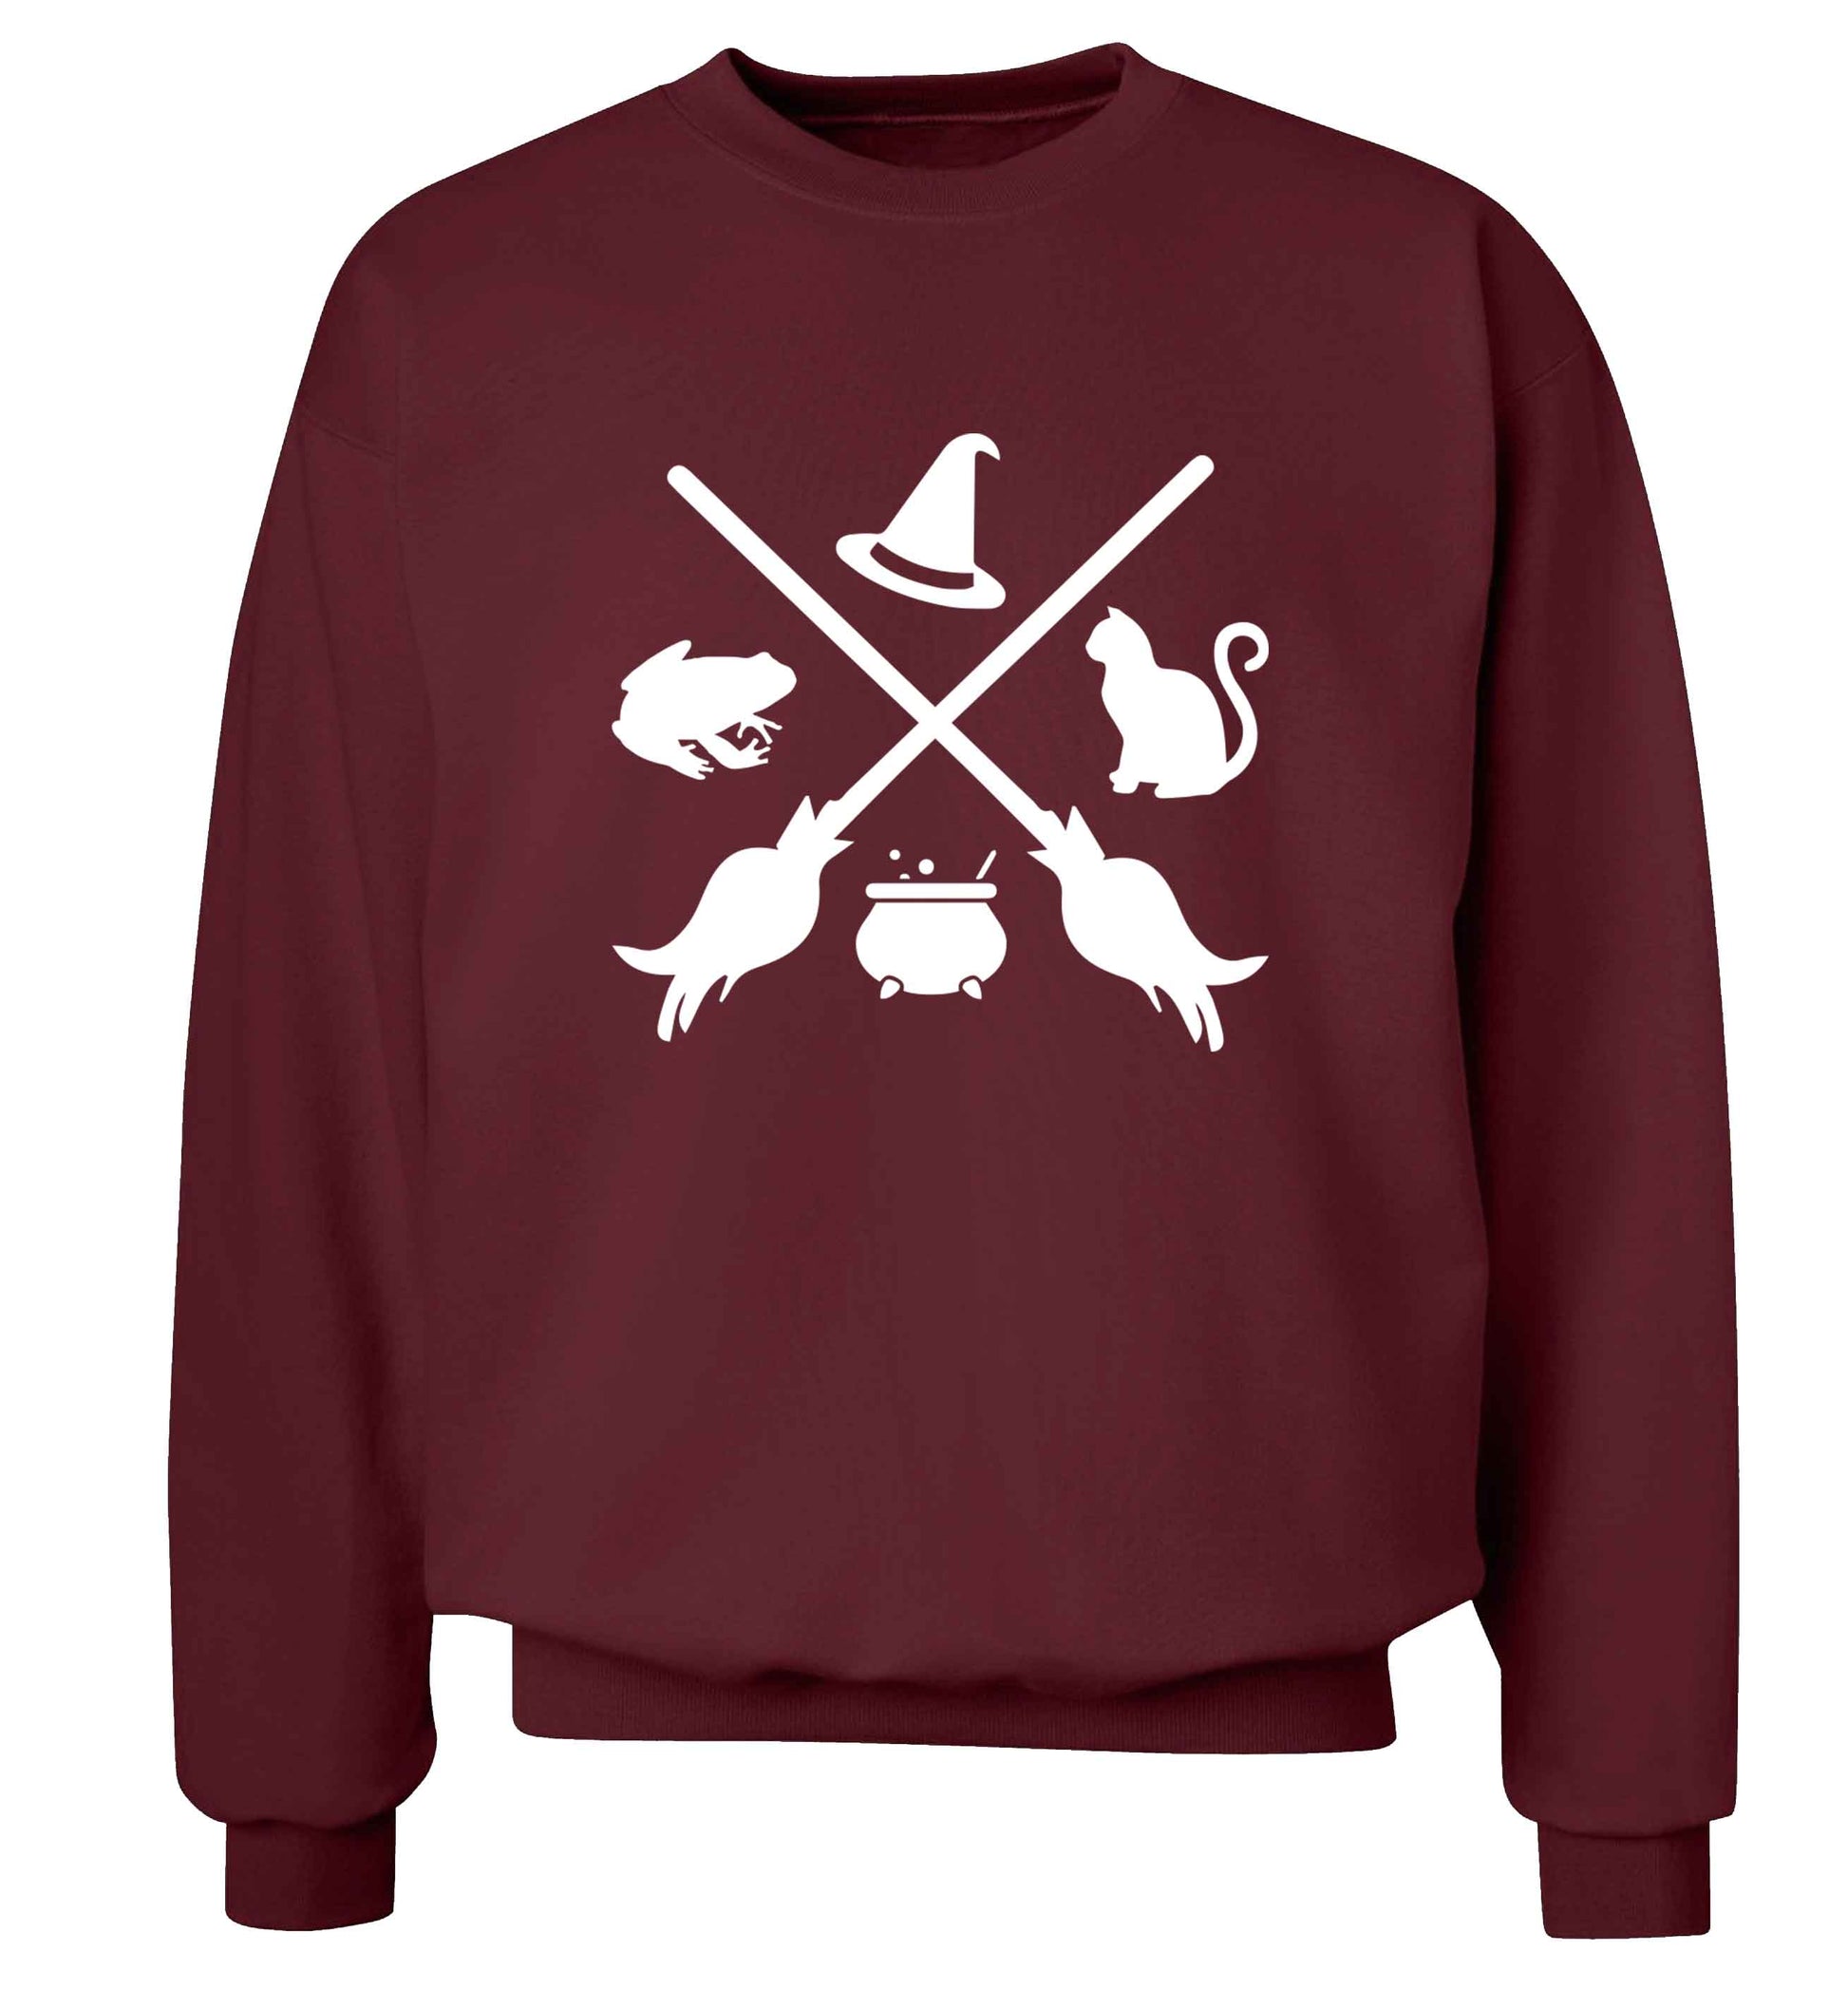 Witch symbol adult's unisex maroon sweater 2XL